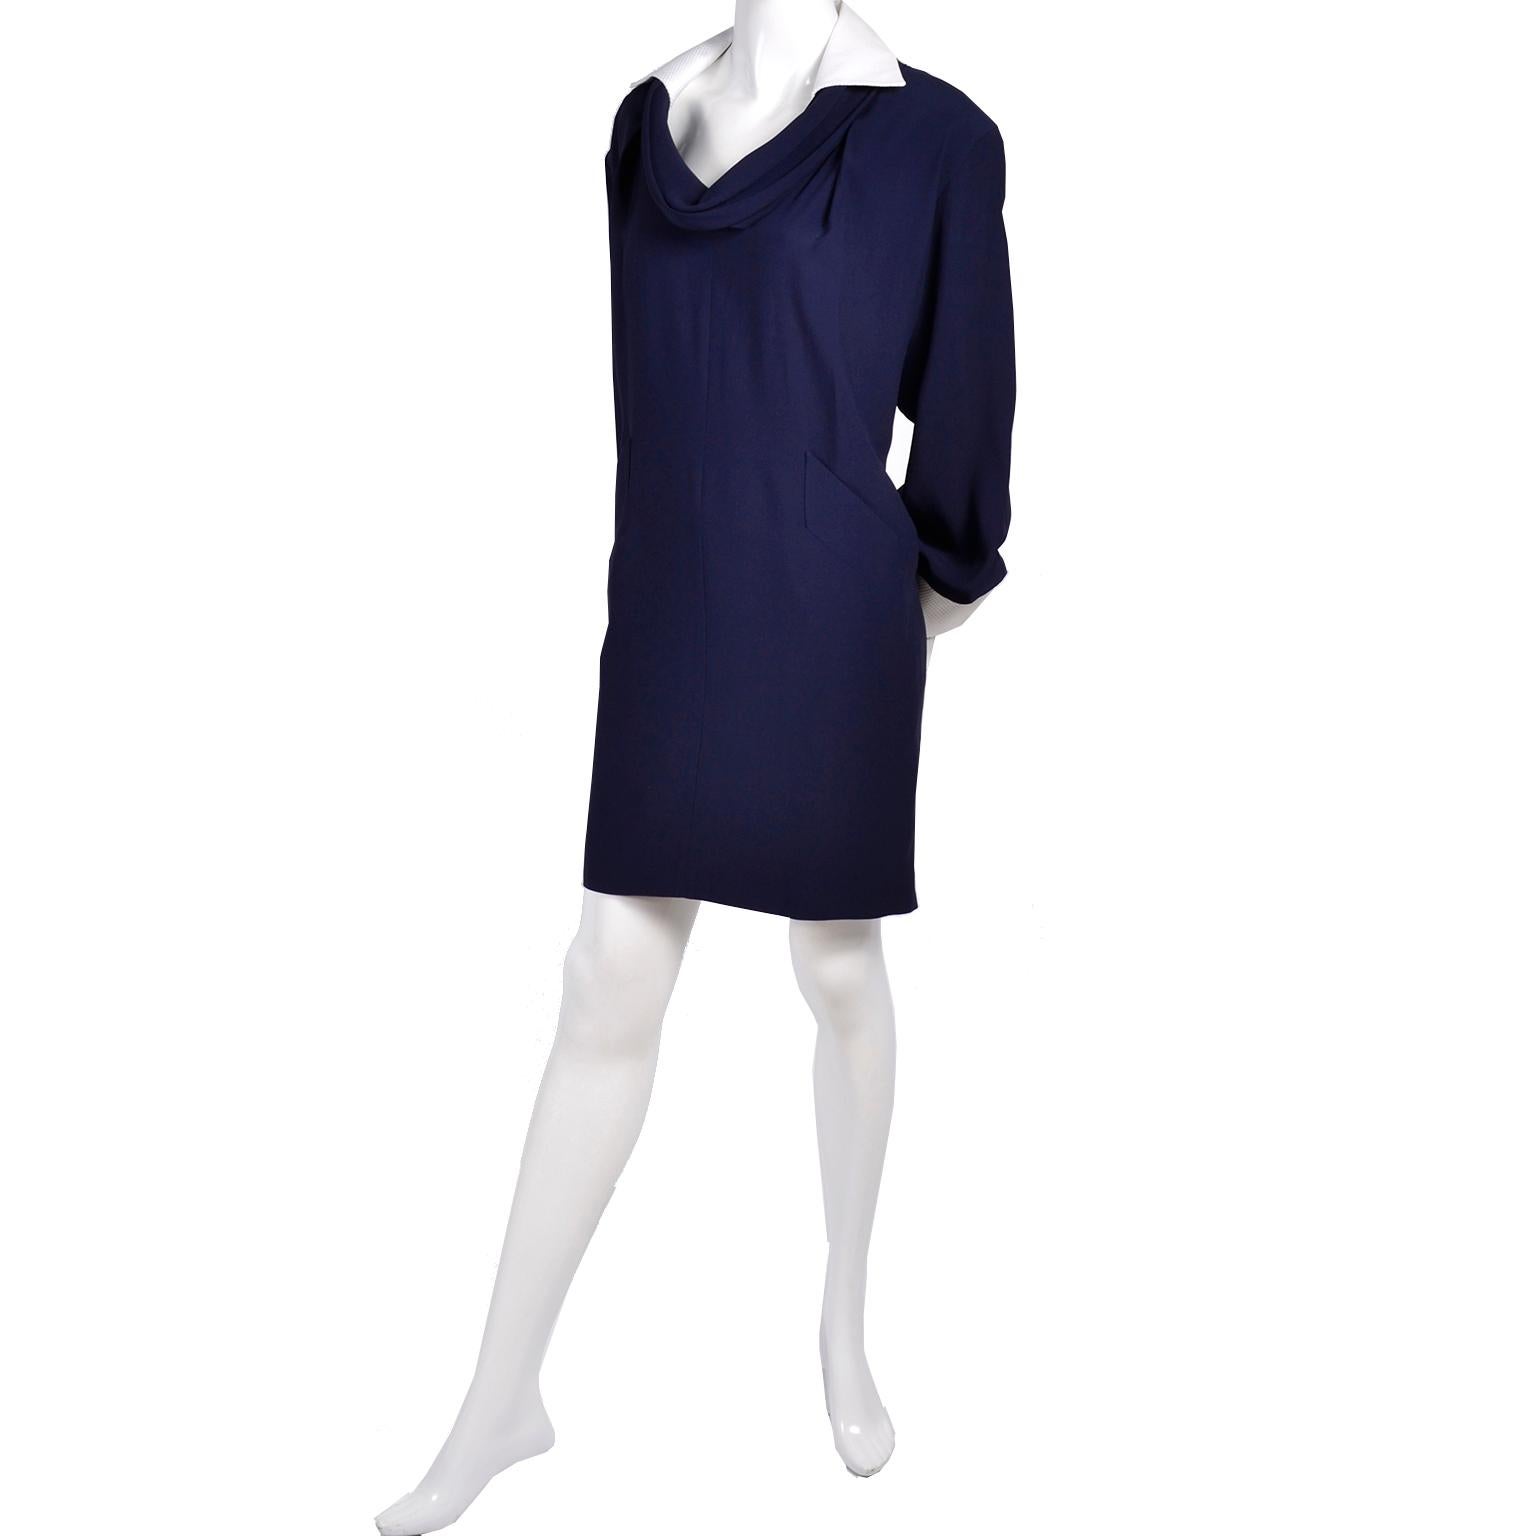 This is a great vintage 1990's Ferre Studio 0001 dress that is super versatile and easy to wear. The dress is in a navy blue rayon blend with a white pique collar and upturned cuffs.  The neckline is so  beautifully draped and we like the way the